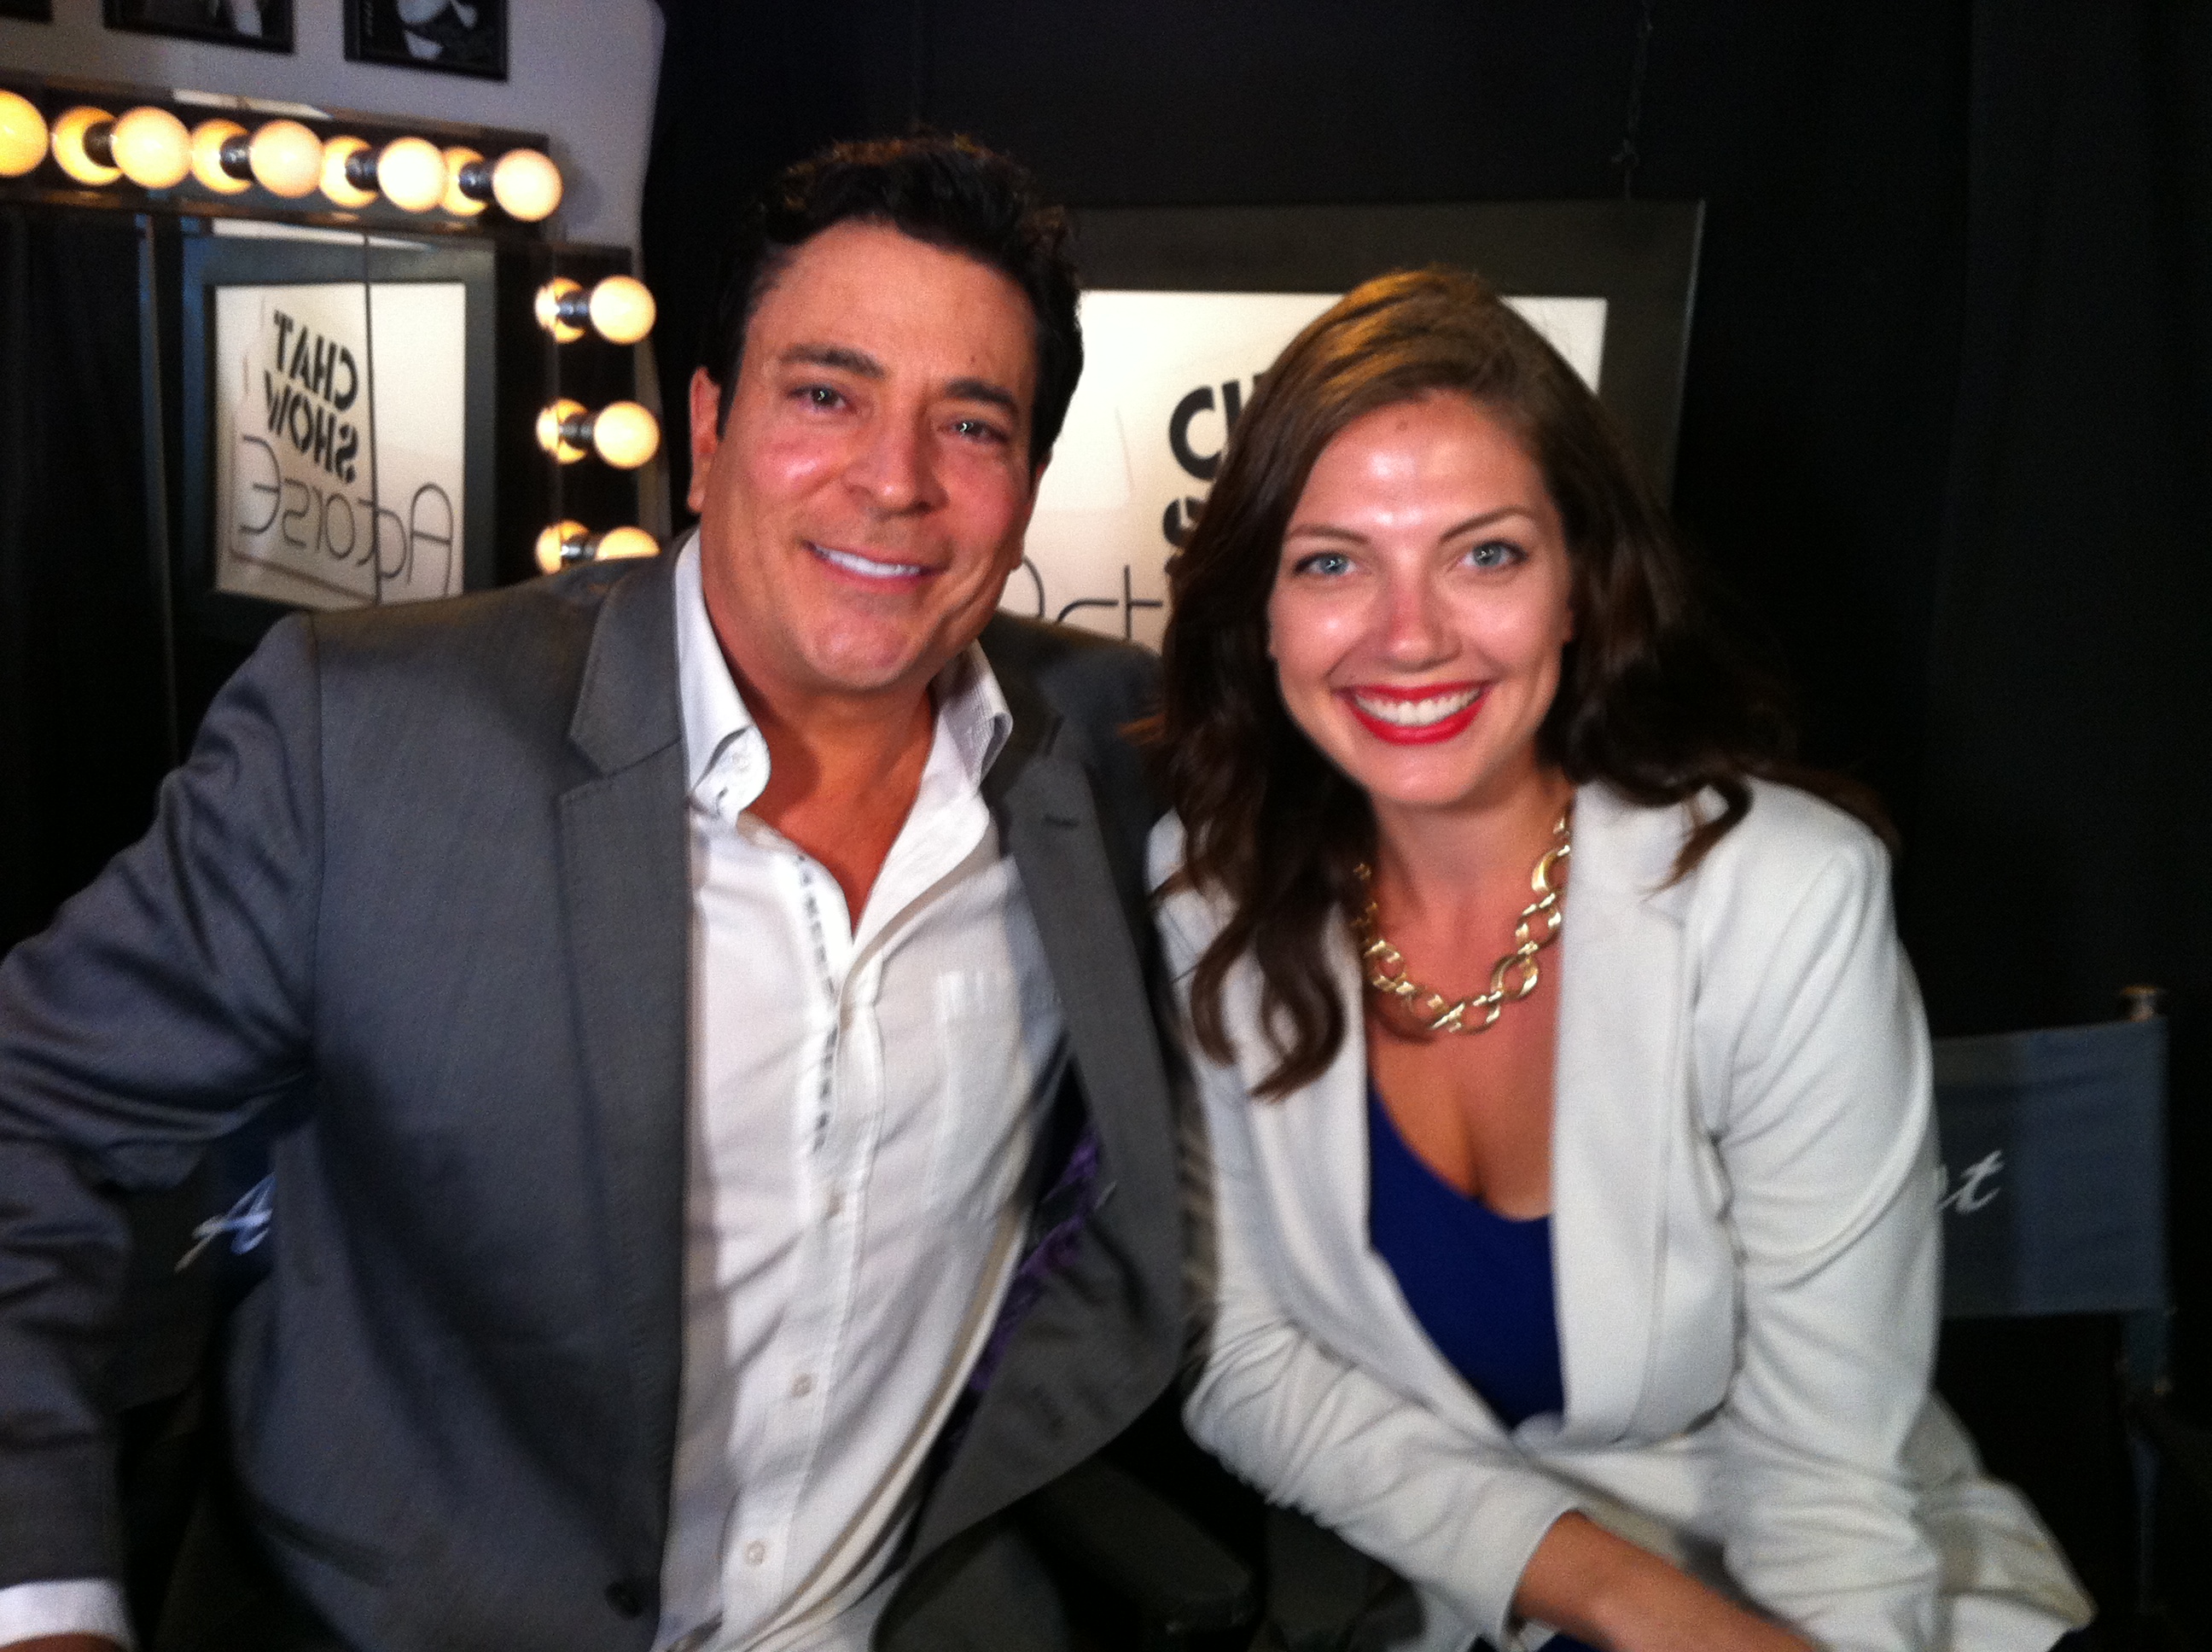 Writer/Director Daniel R. Chavez guest appearance on ActorsE Chat with host Julie-Kathleen Langan.